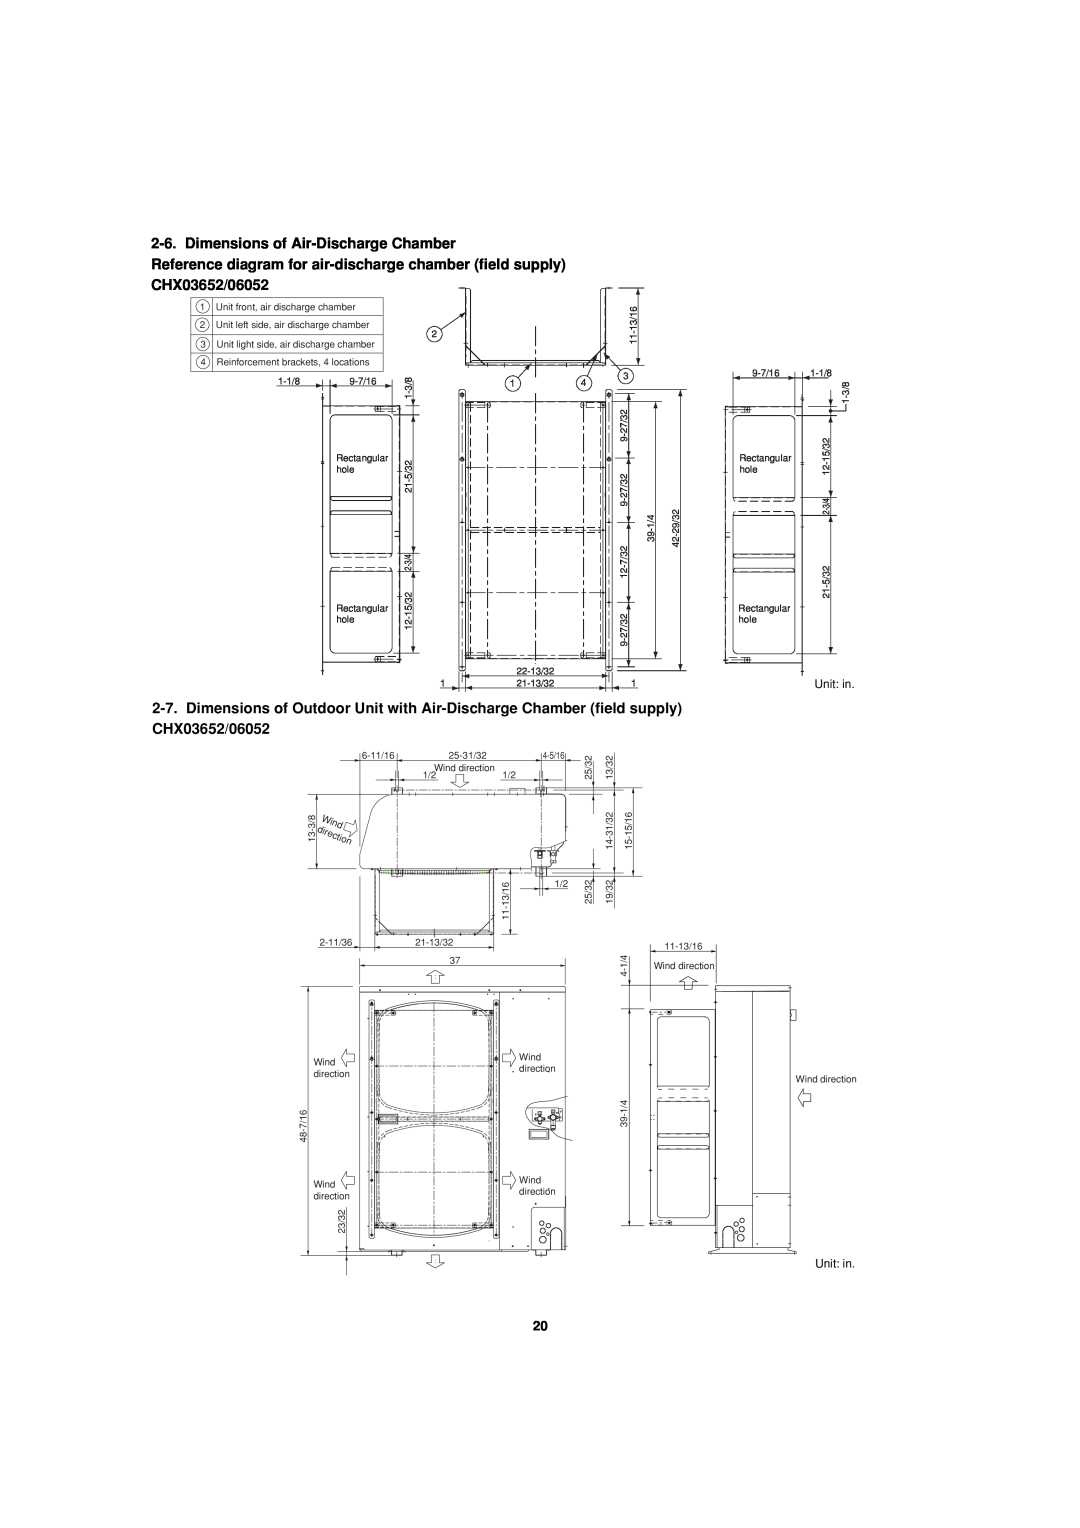 Sanyo 85464359981002 installation instructions Dimensions of Air-DischargeChamber, CHX03652/06052, Unit: in 